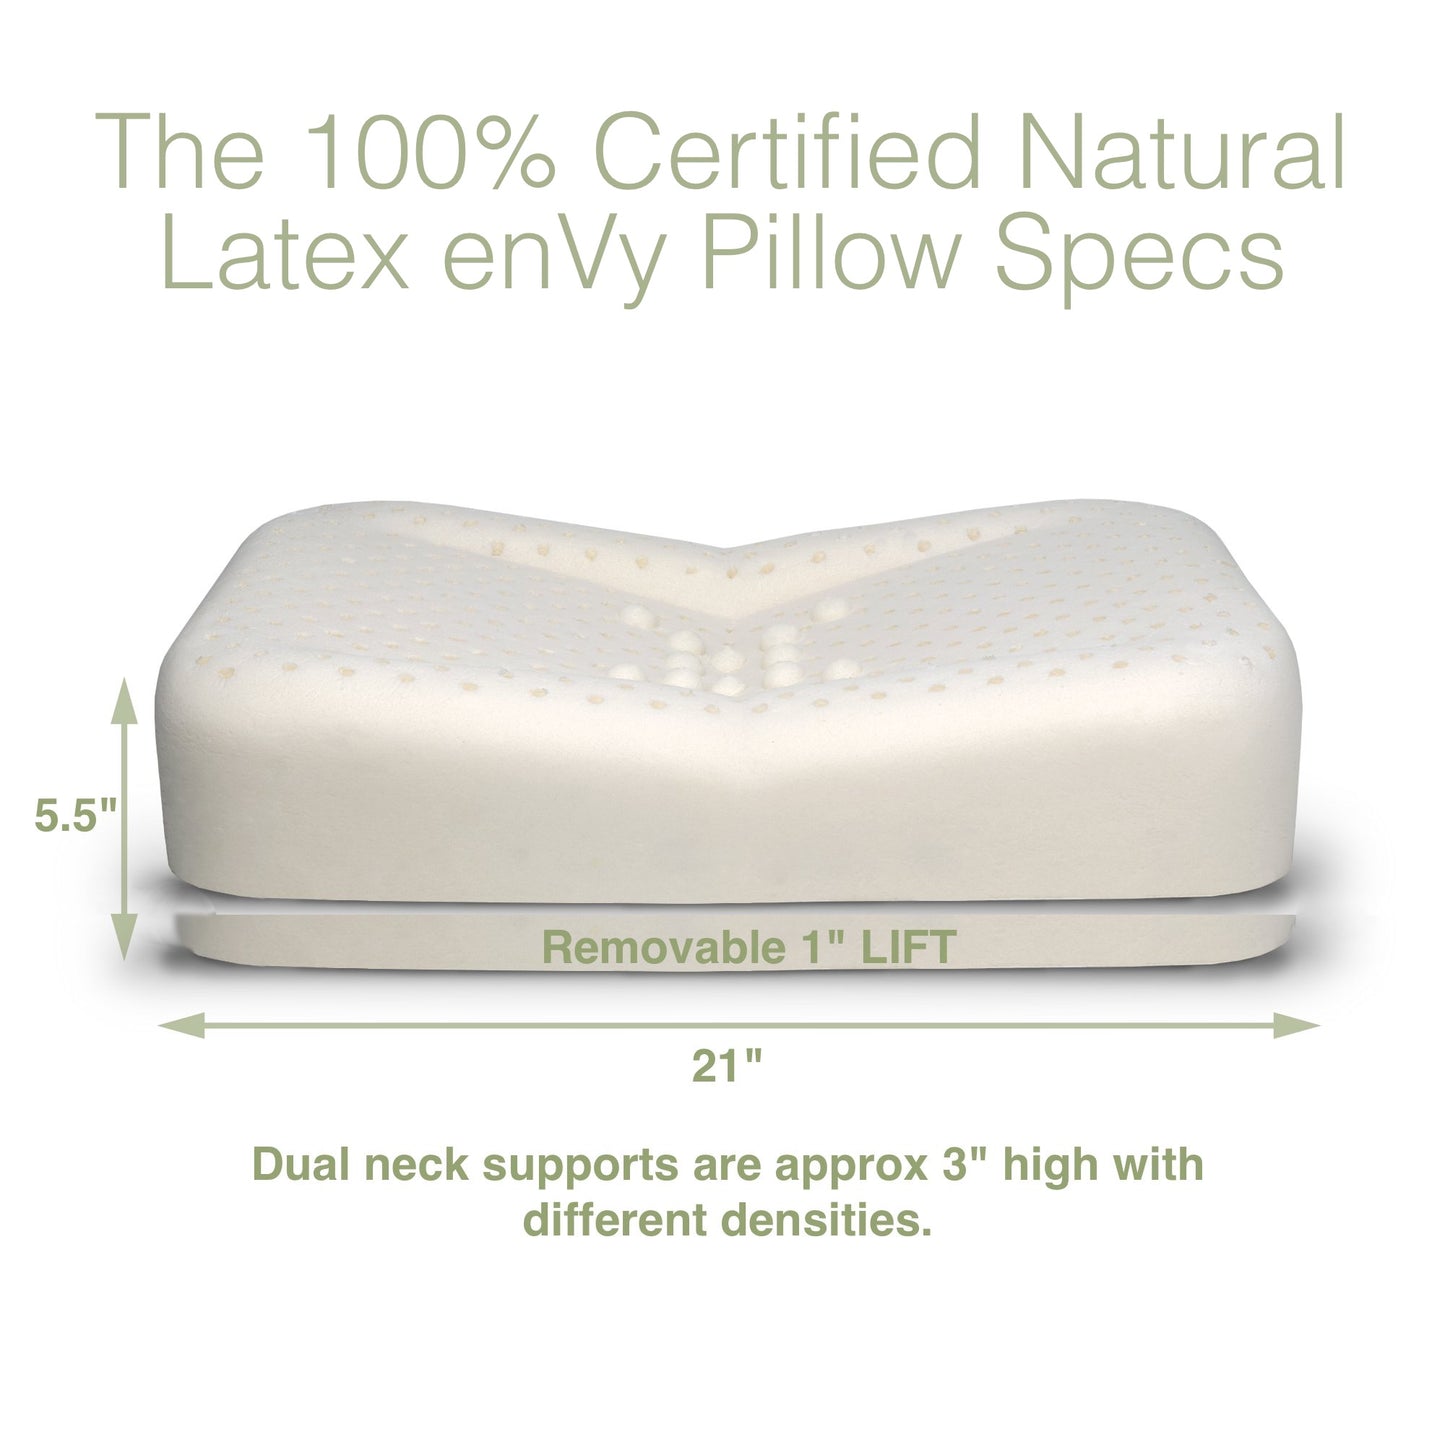 enVy® RX 100% Natural Latex PROACTIVE-Aging Pillow with Botanical TENCEL™ Pillowcase